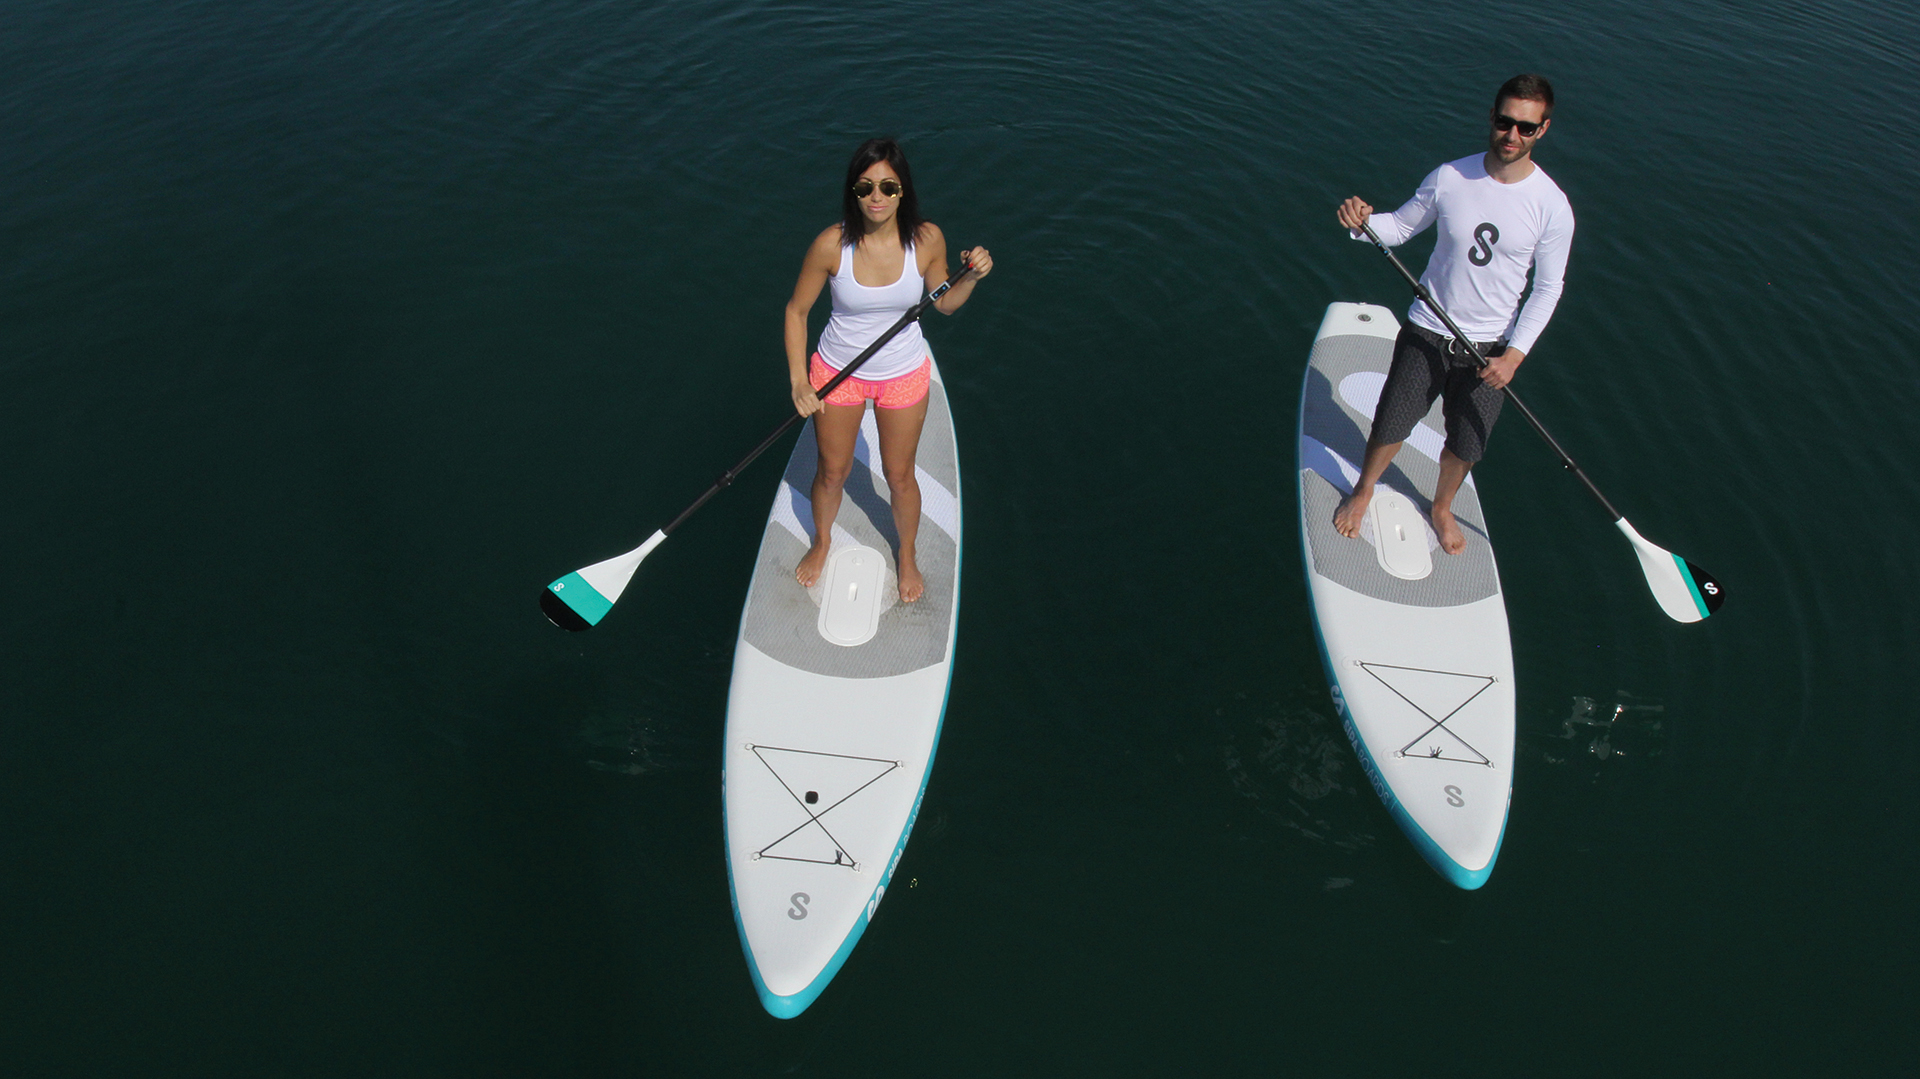 A Self-Inflating, Self-Propelled, Stand-Up Paddleboard